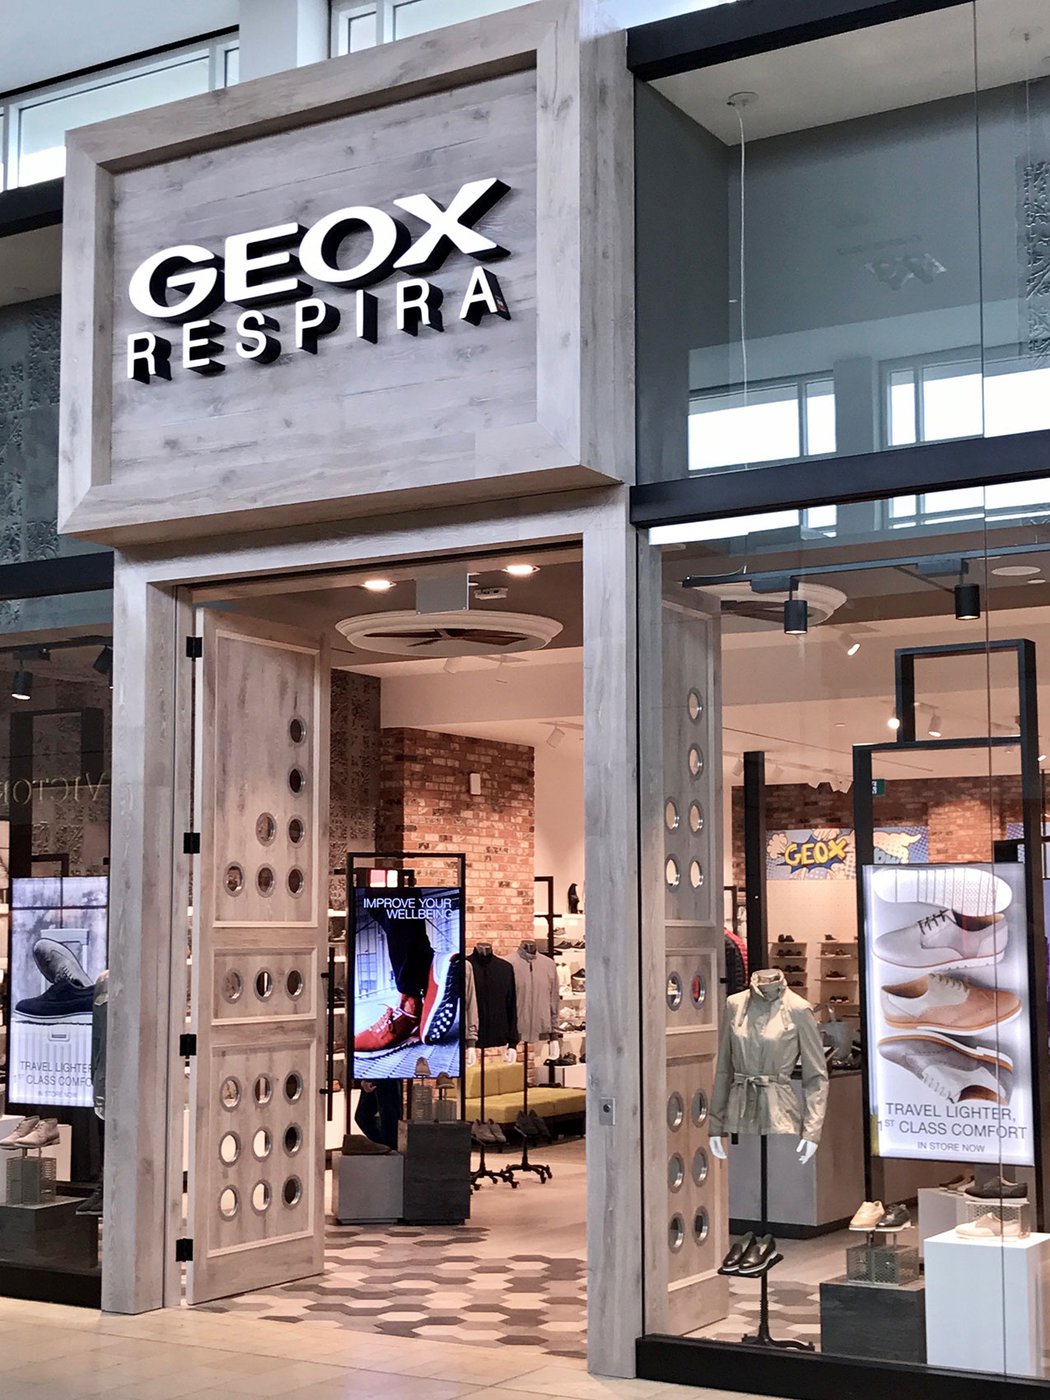 Geox Shop: design and tiles | Marca